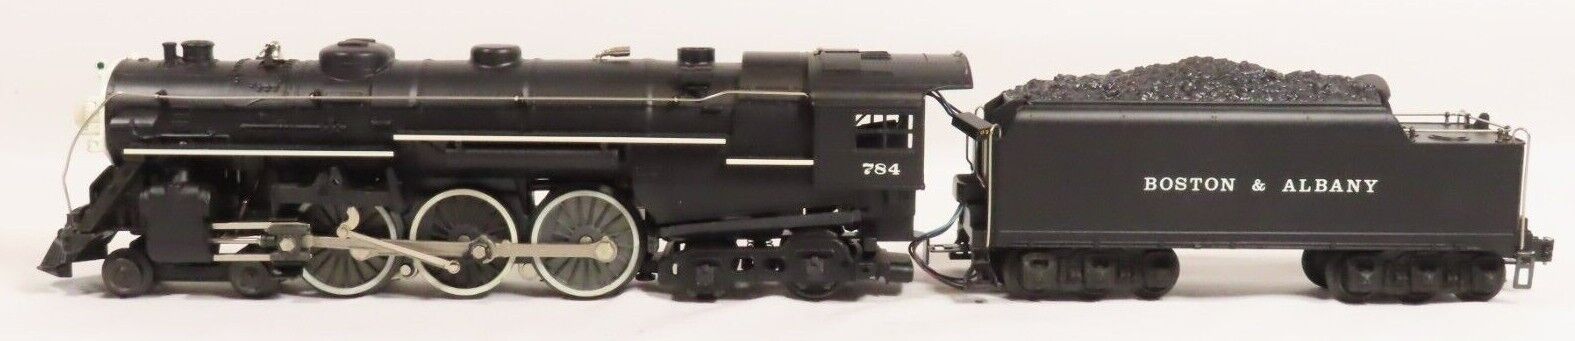 Lionel 6-8606 Boston & Albany 4-6-4 Hudson Magne Traction Smoke Whistle LN